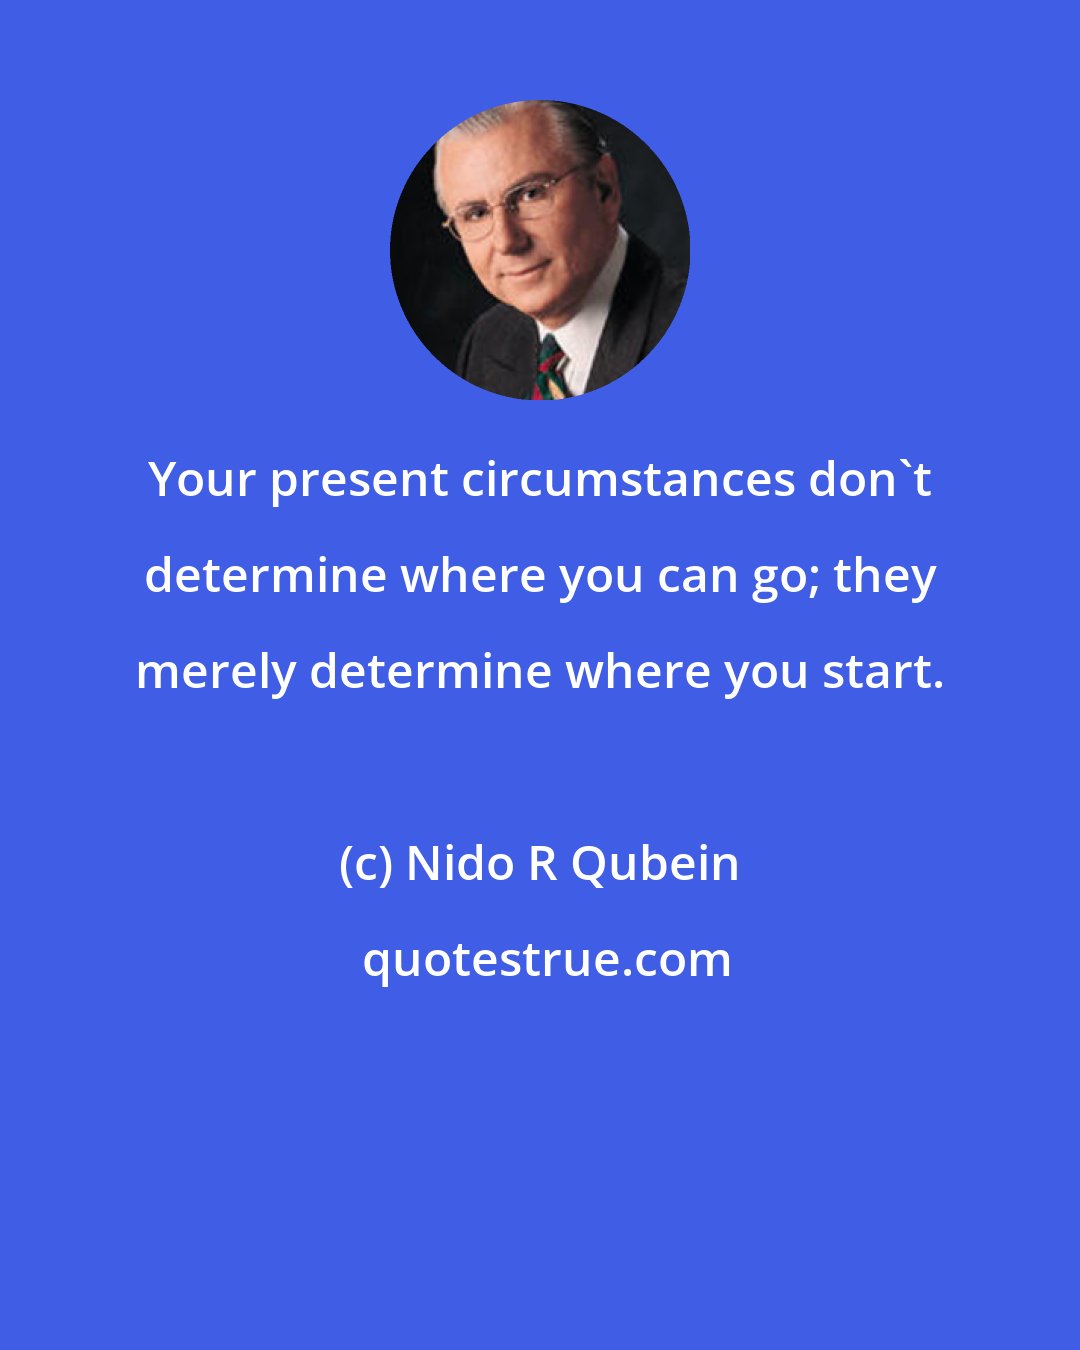 Nido R Qubein: Your present circumstances don't determine where you can go; they merely determine where you start.